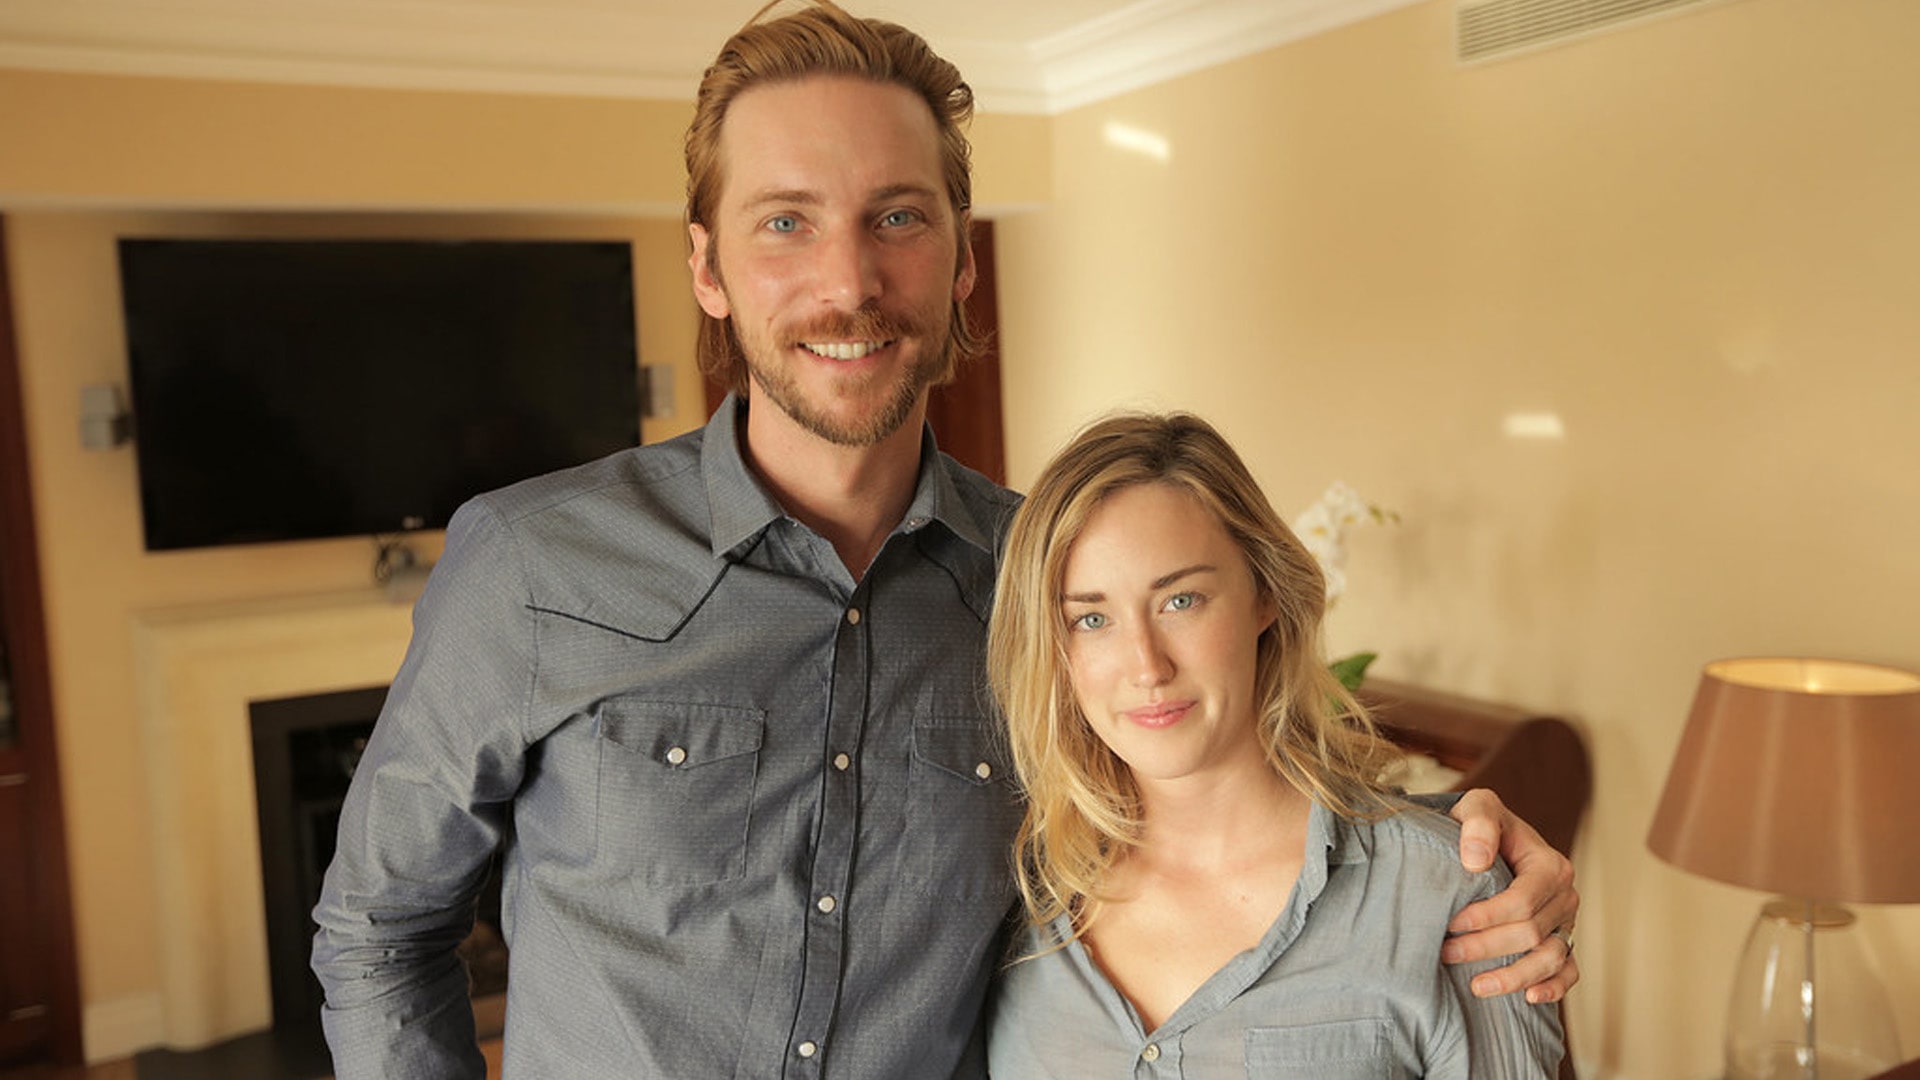 Troy Baker and Ashley Johnson, voice actors, as Joel and Ellie in The Last of Us